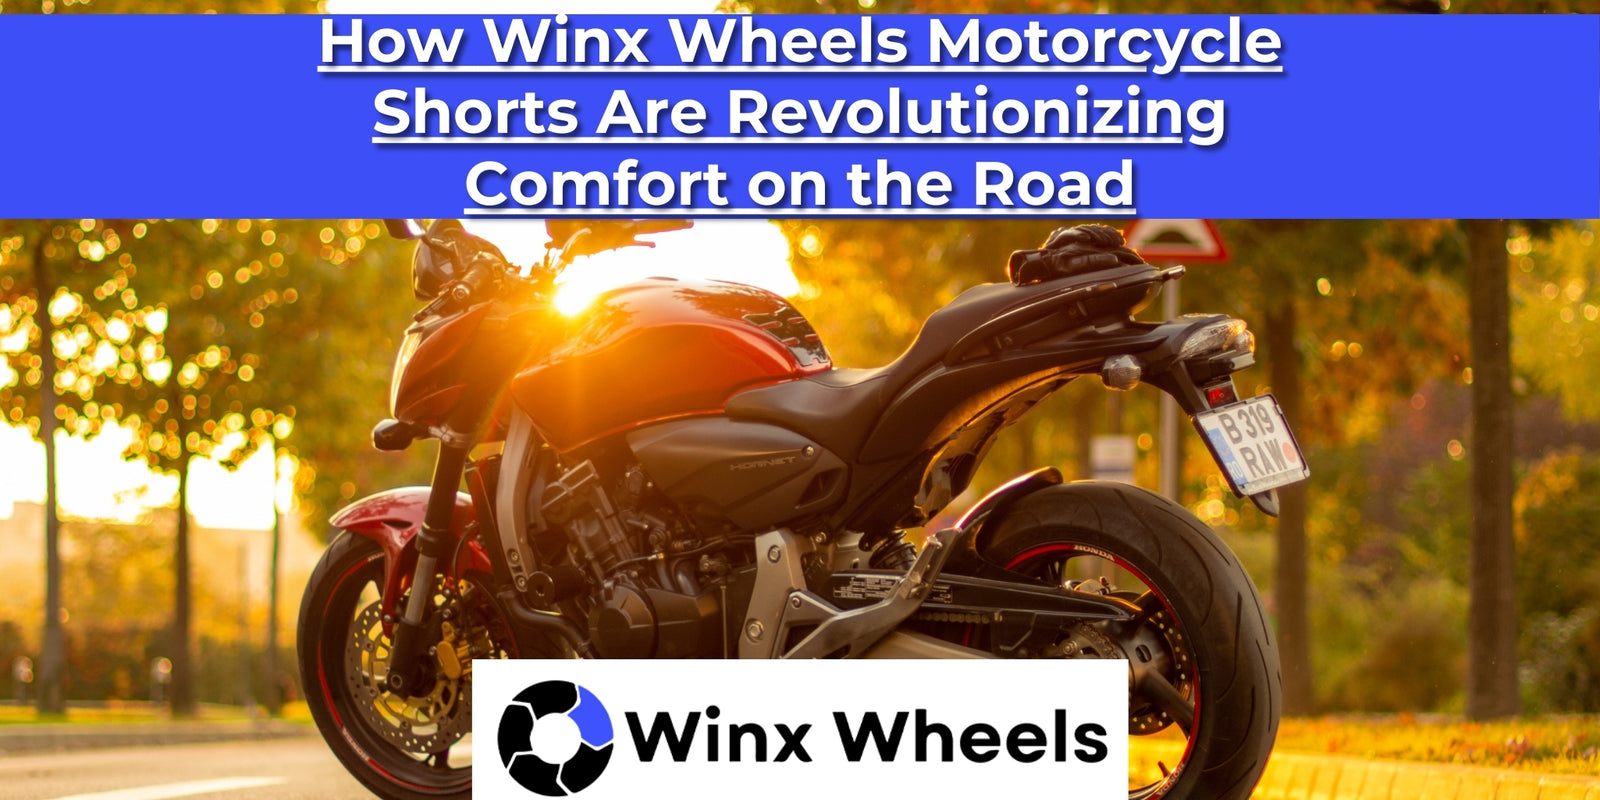 How Winx Wheels Motorcycle Shorts Are Revolutionizing Comfort on the Road